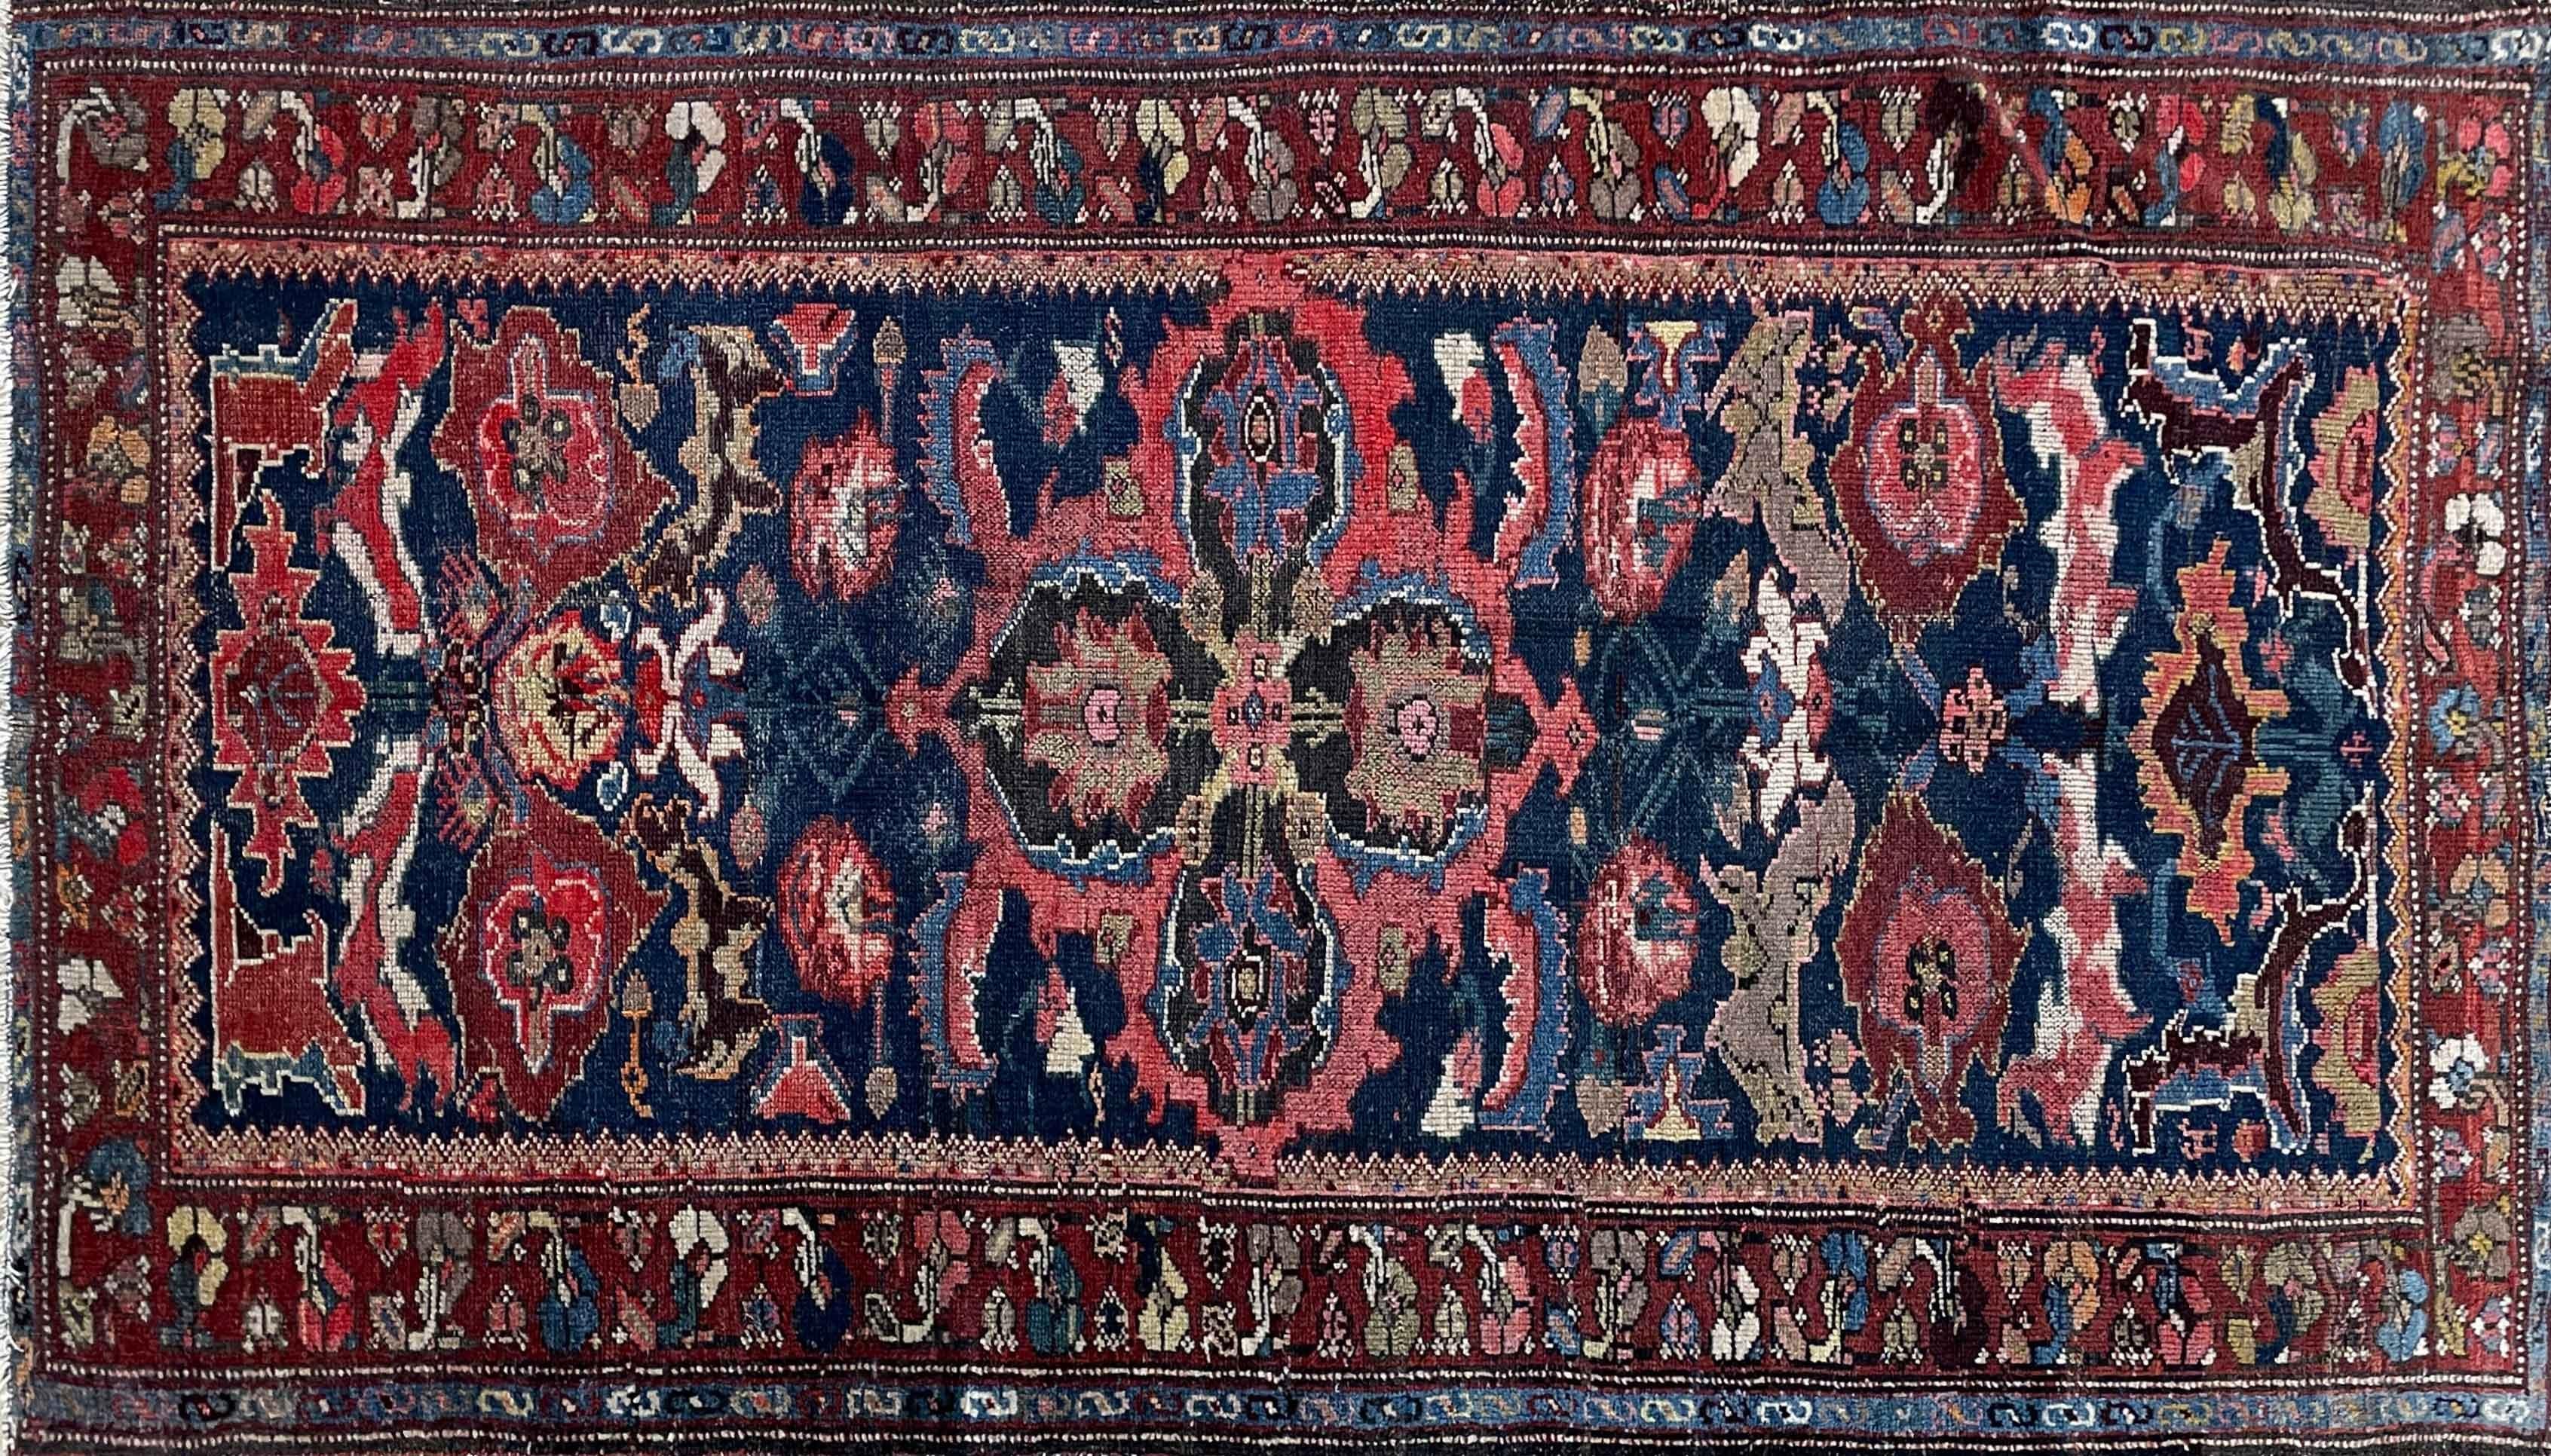 A Stunning Persian Bakhtiari Rug: A Timeless Masterpiece from the 1920s

Imagine stepping into a room adorned with a magnificent 3'5